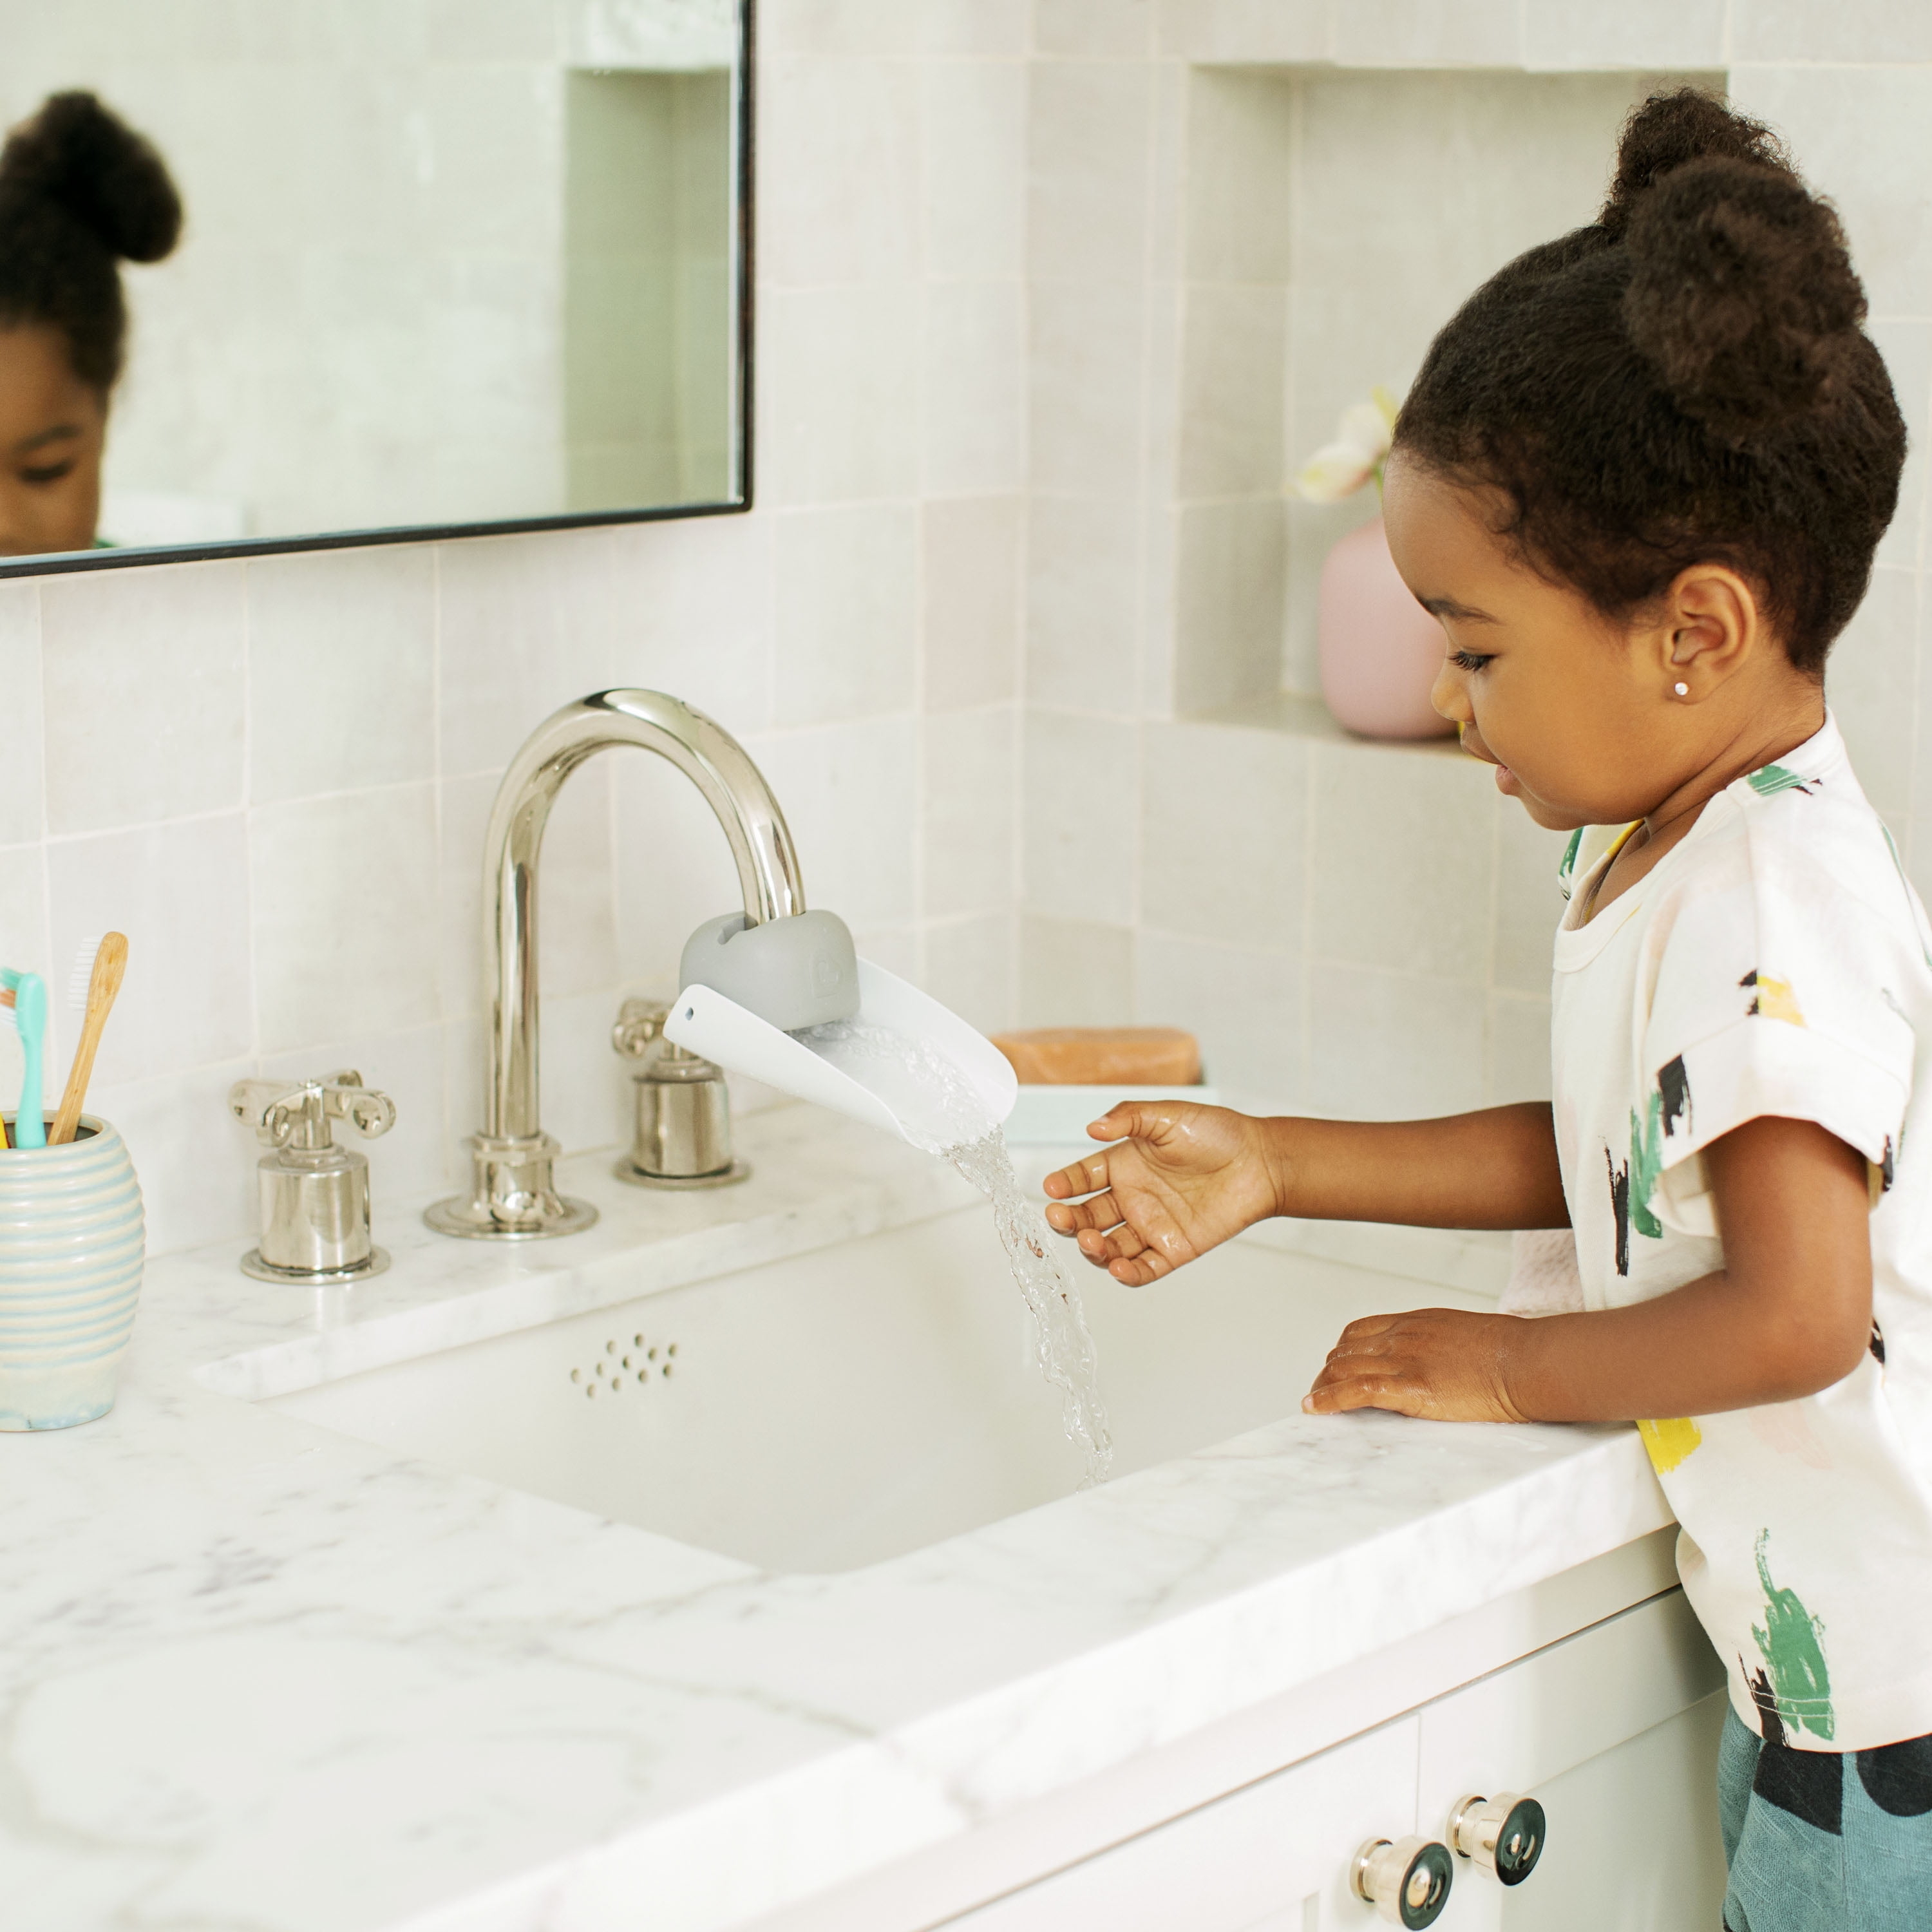 Child washing hands in bathroom sink, reflecting hygiene practices; suitable for shopping for kids&#x27; toiletries